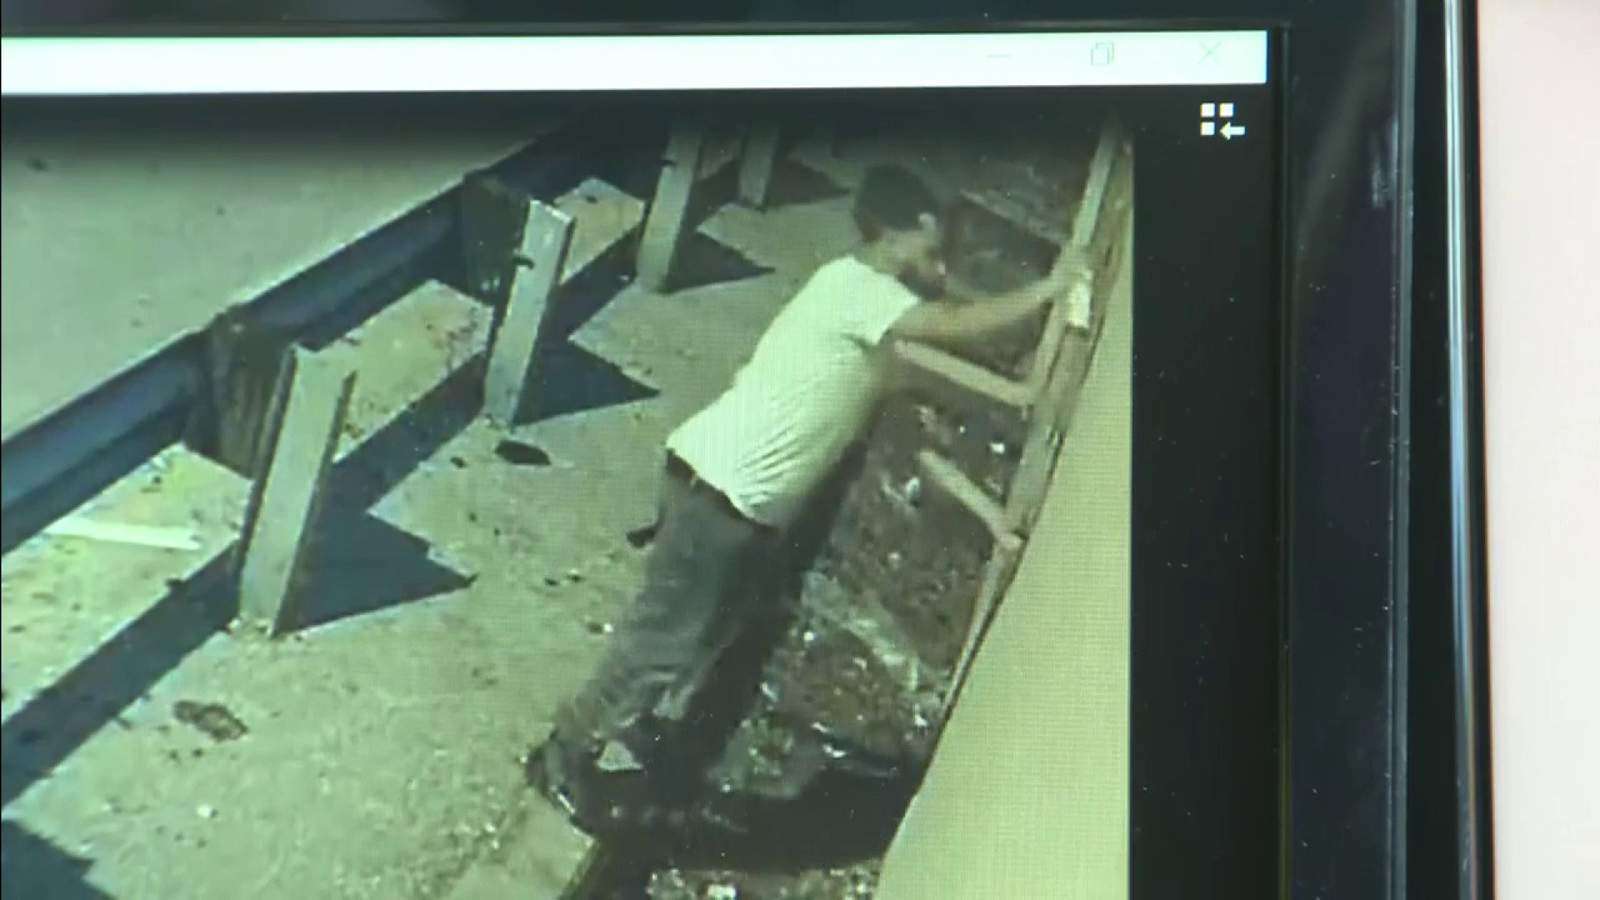 Graffiti bandit targeting Hollywood business not deterred by security cameras - WPLG Local 10